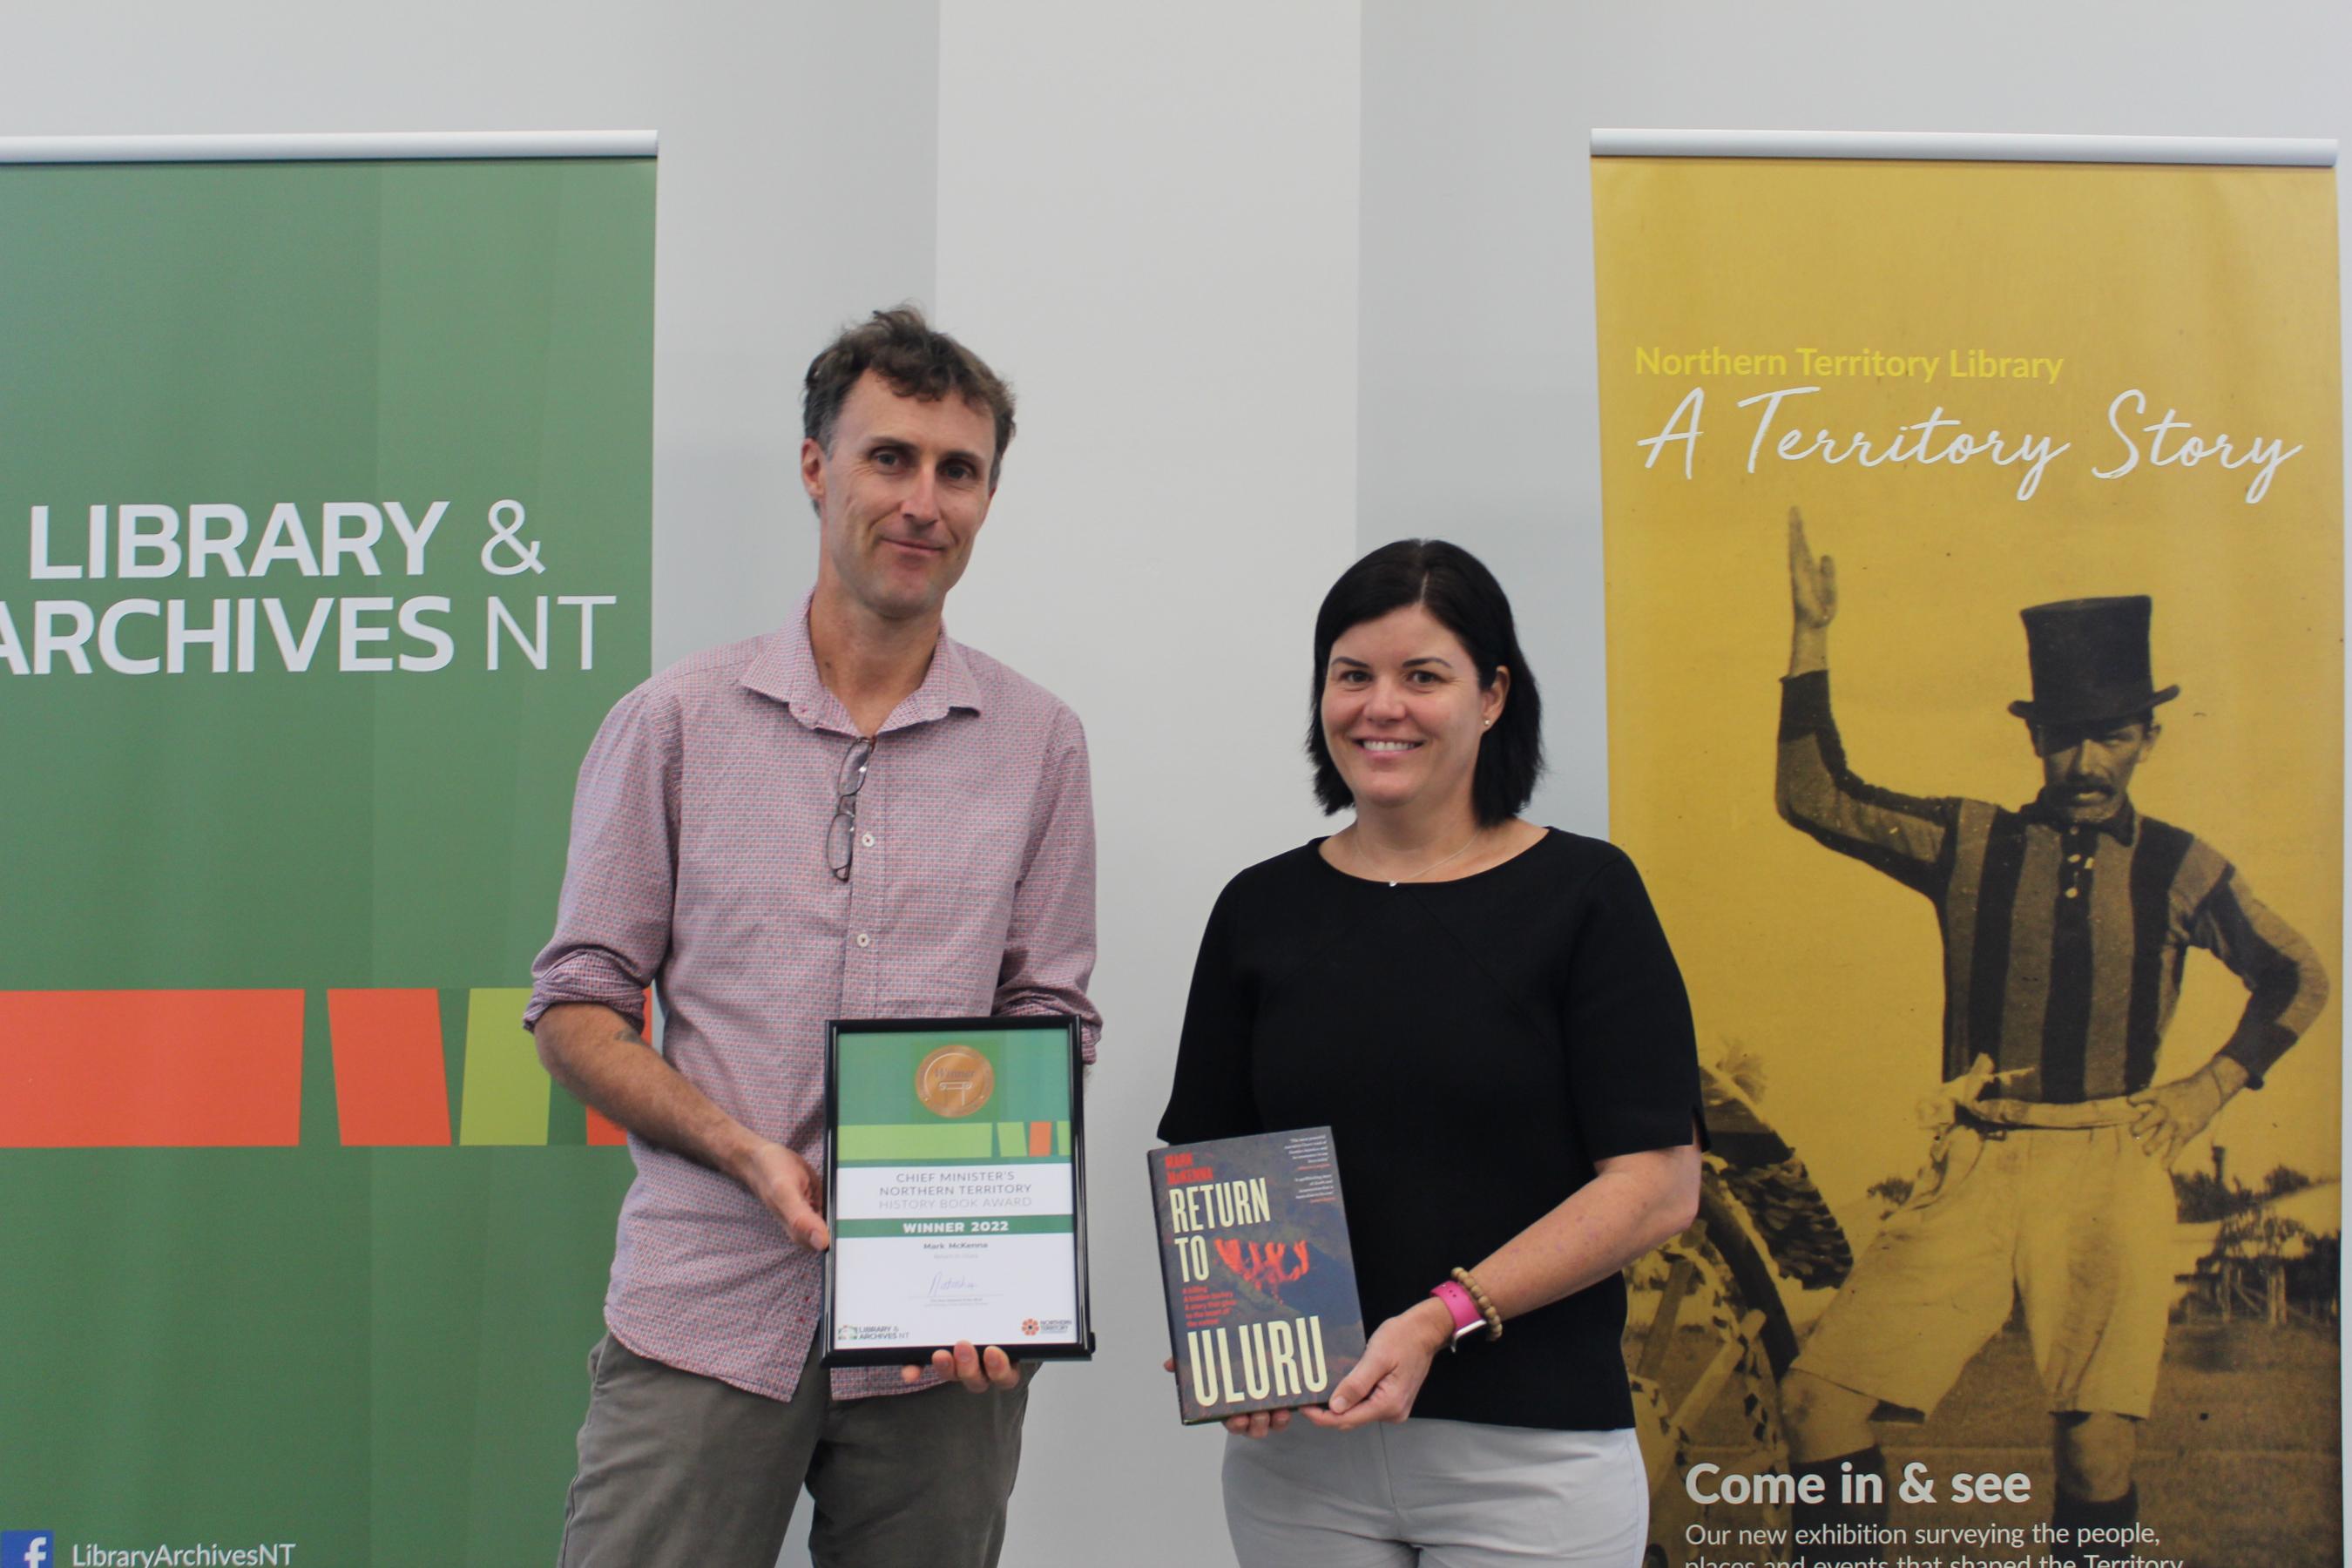 Image of tall man of causasian appearance standing next to slightly shorter woman of causacian appearance with brown hair. Man is holding framed certificate, woman is holding book 'return to uluru' Standing in between two promotional banners for LANT